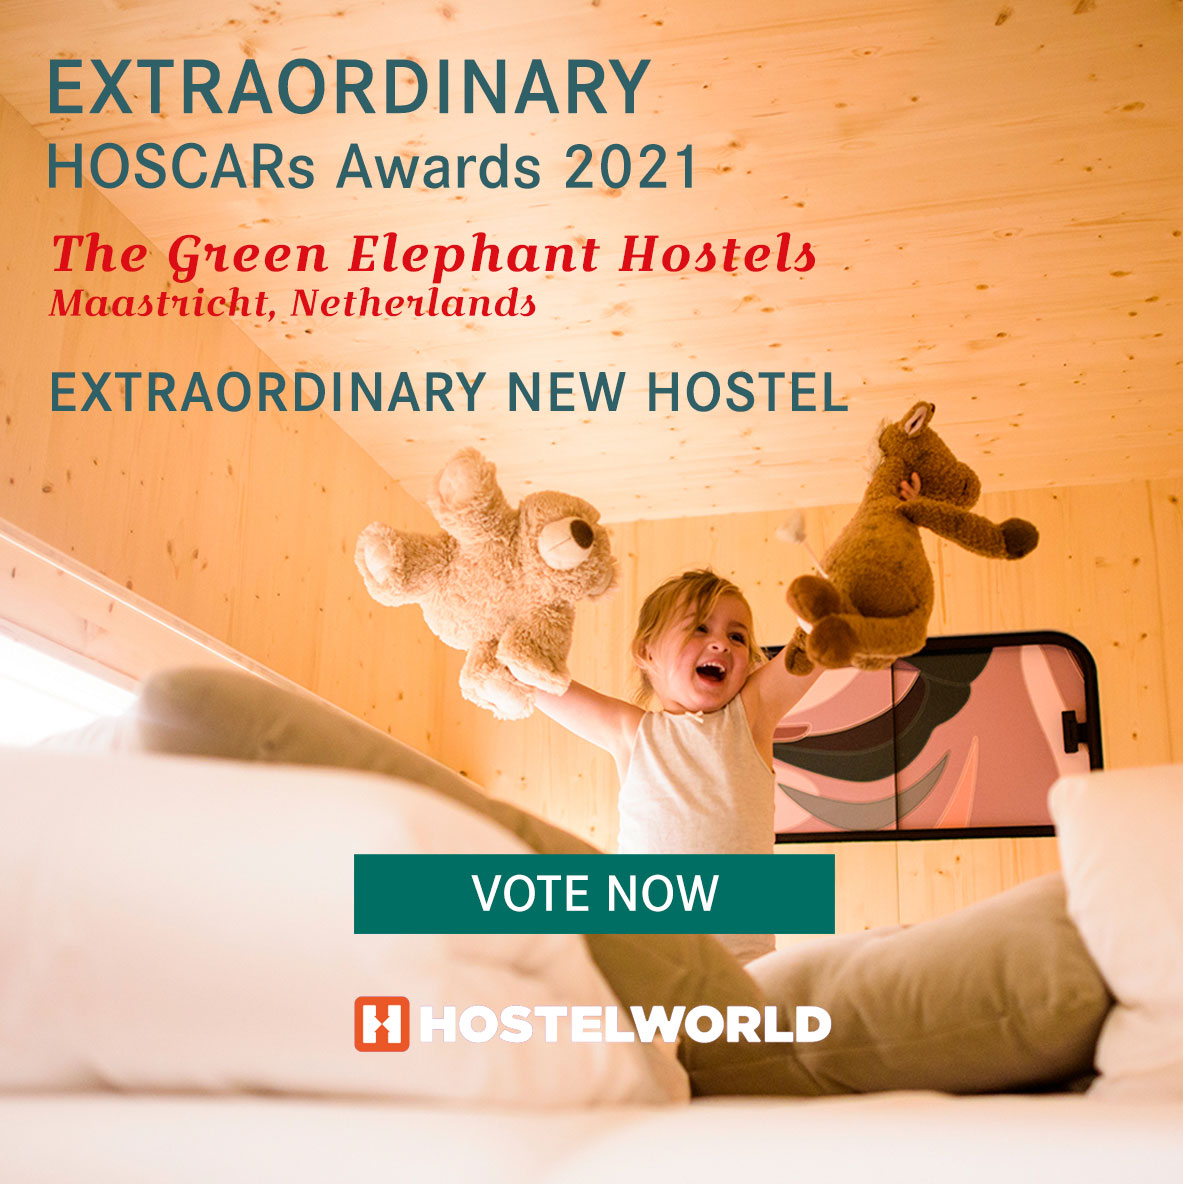 nomination as 1 of the 5 best new hotels world wide - The Green Elephant Hostels